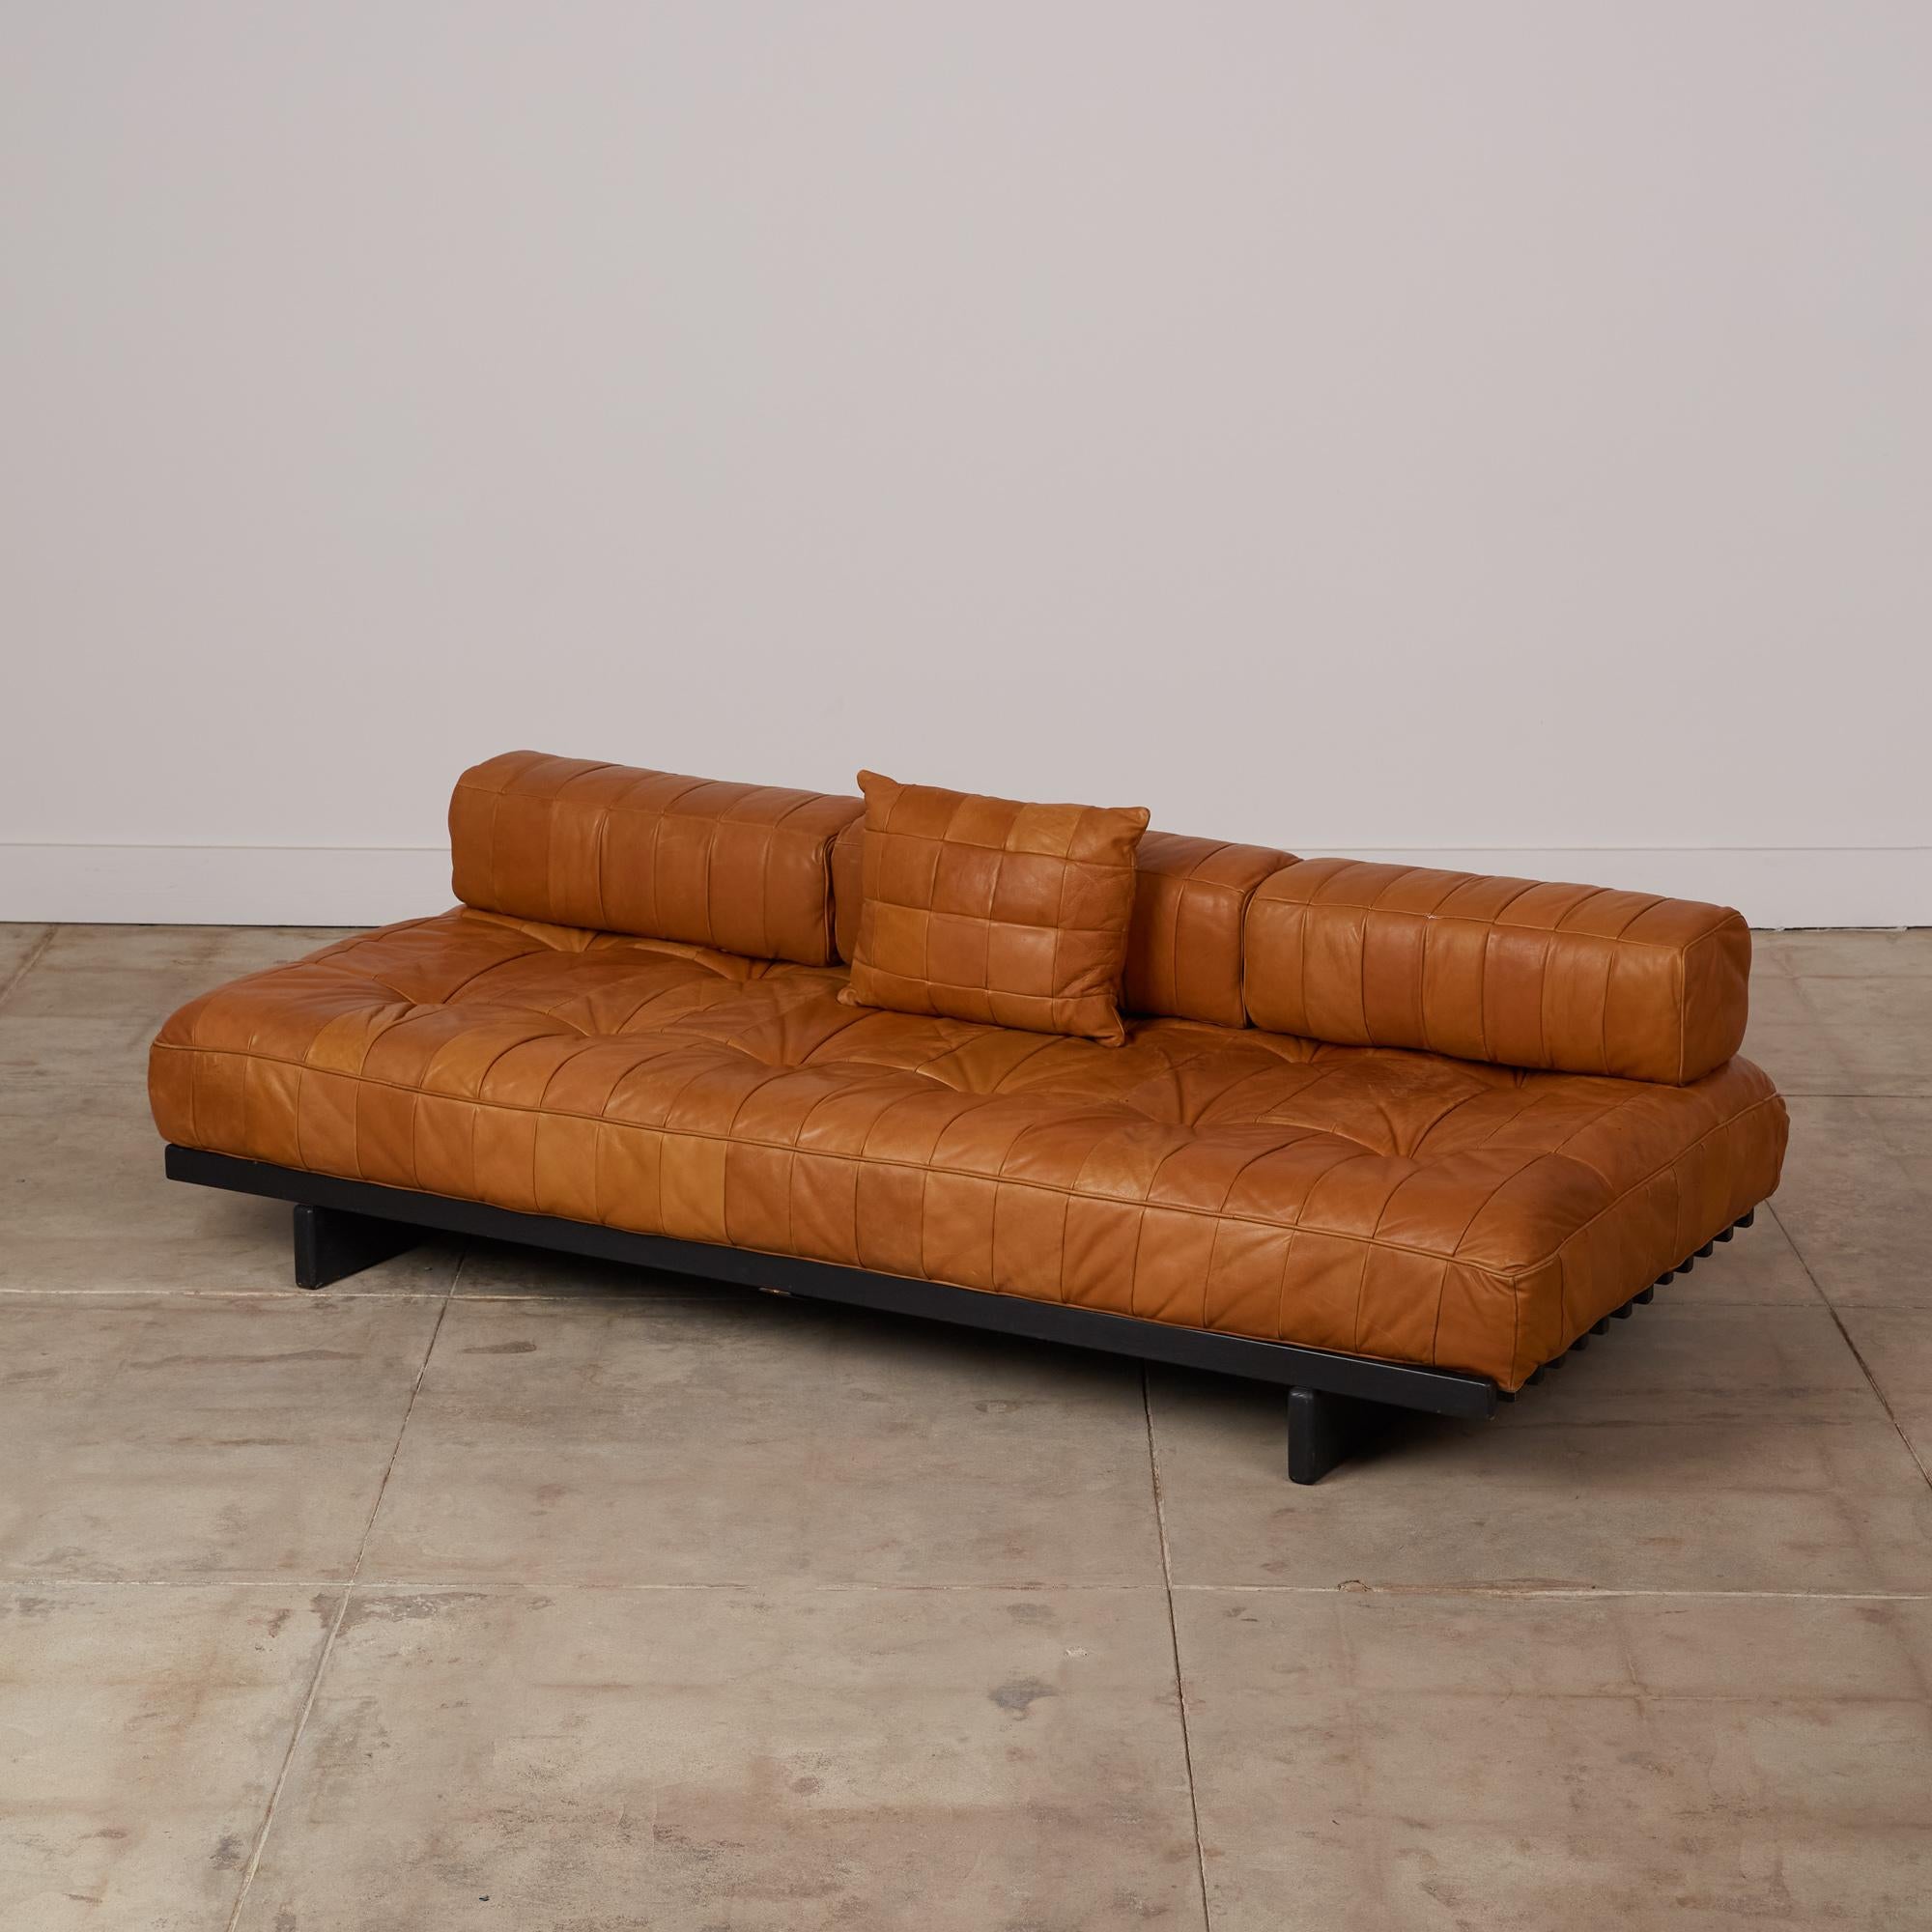 DS 80 leather daybed by De Sede, Switzerland, c.1960s. The daybed features a patinated patchwork leather tufted cushion with three patchwork leather bolster cushions and a single leather throw pillow. The wooden slat frame has an ebonized